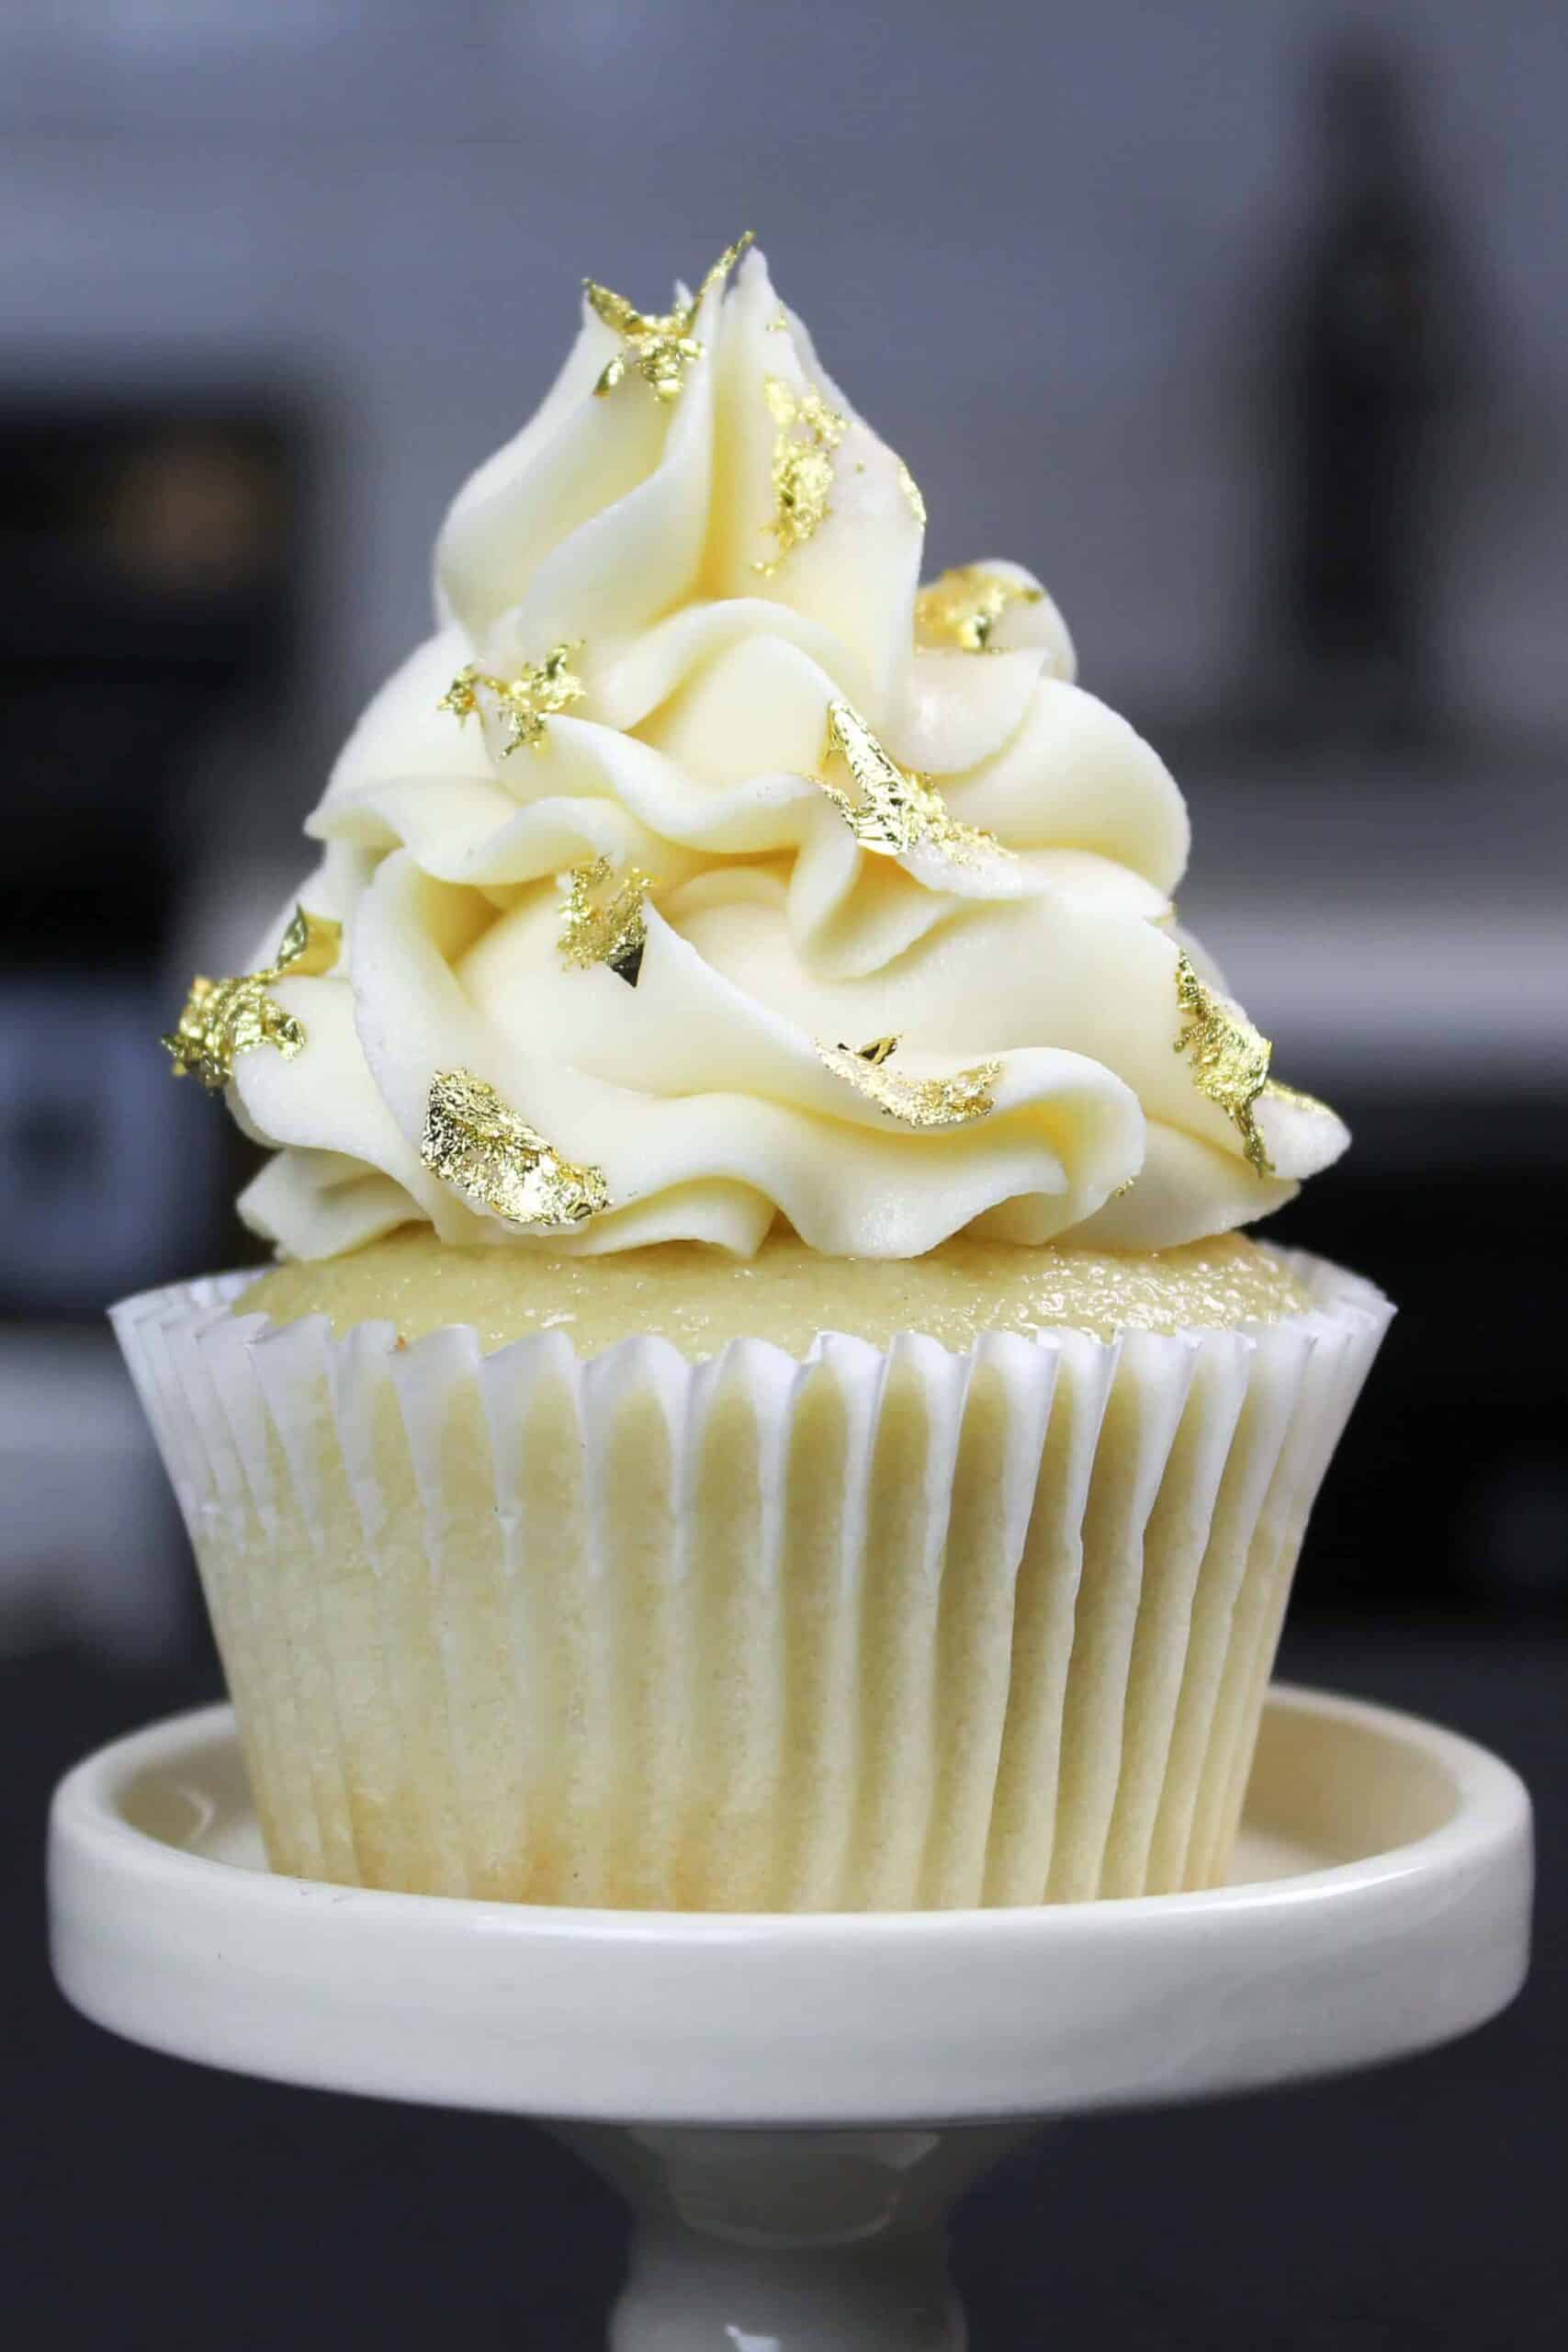 image of vanilla cupcake decorated with edible gold leaf